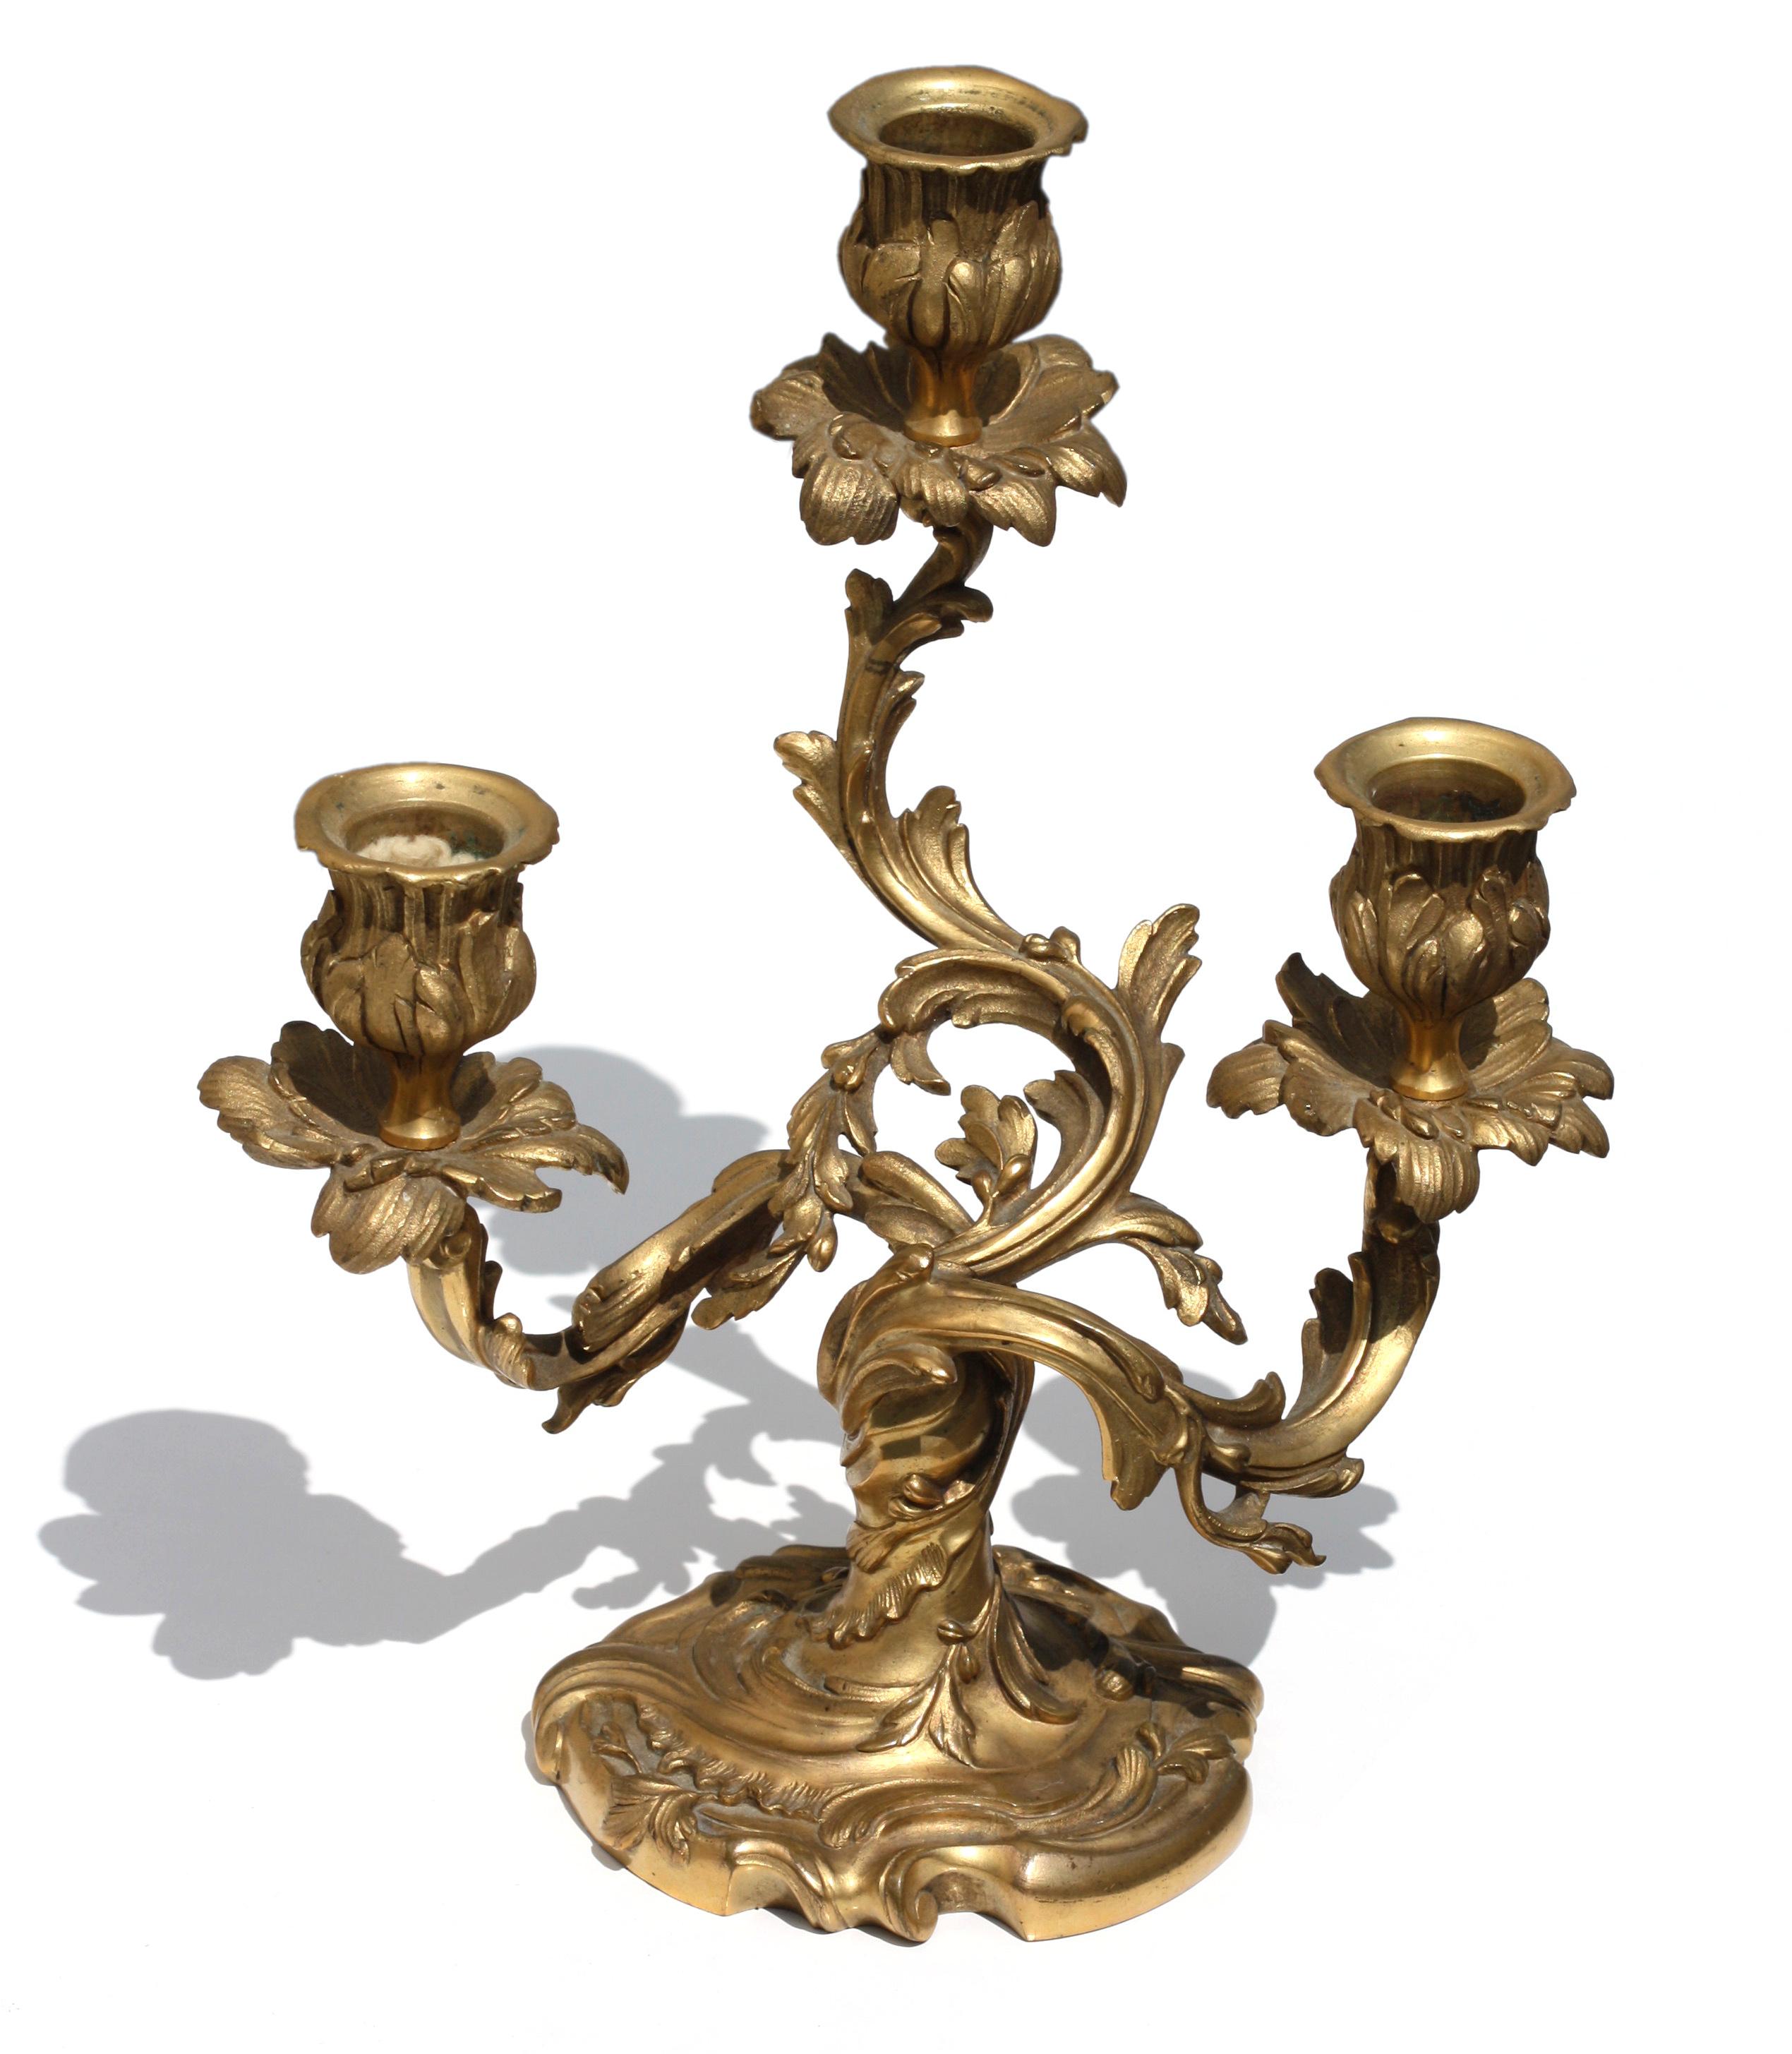 Pair of Louis XV style gilt-bronze three light candelabra
French, 19th century 
Measures: Height 10 in. (25.4 cm.) 
Width 8.5 in. (21.59 cm.).
  